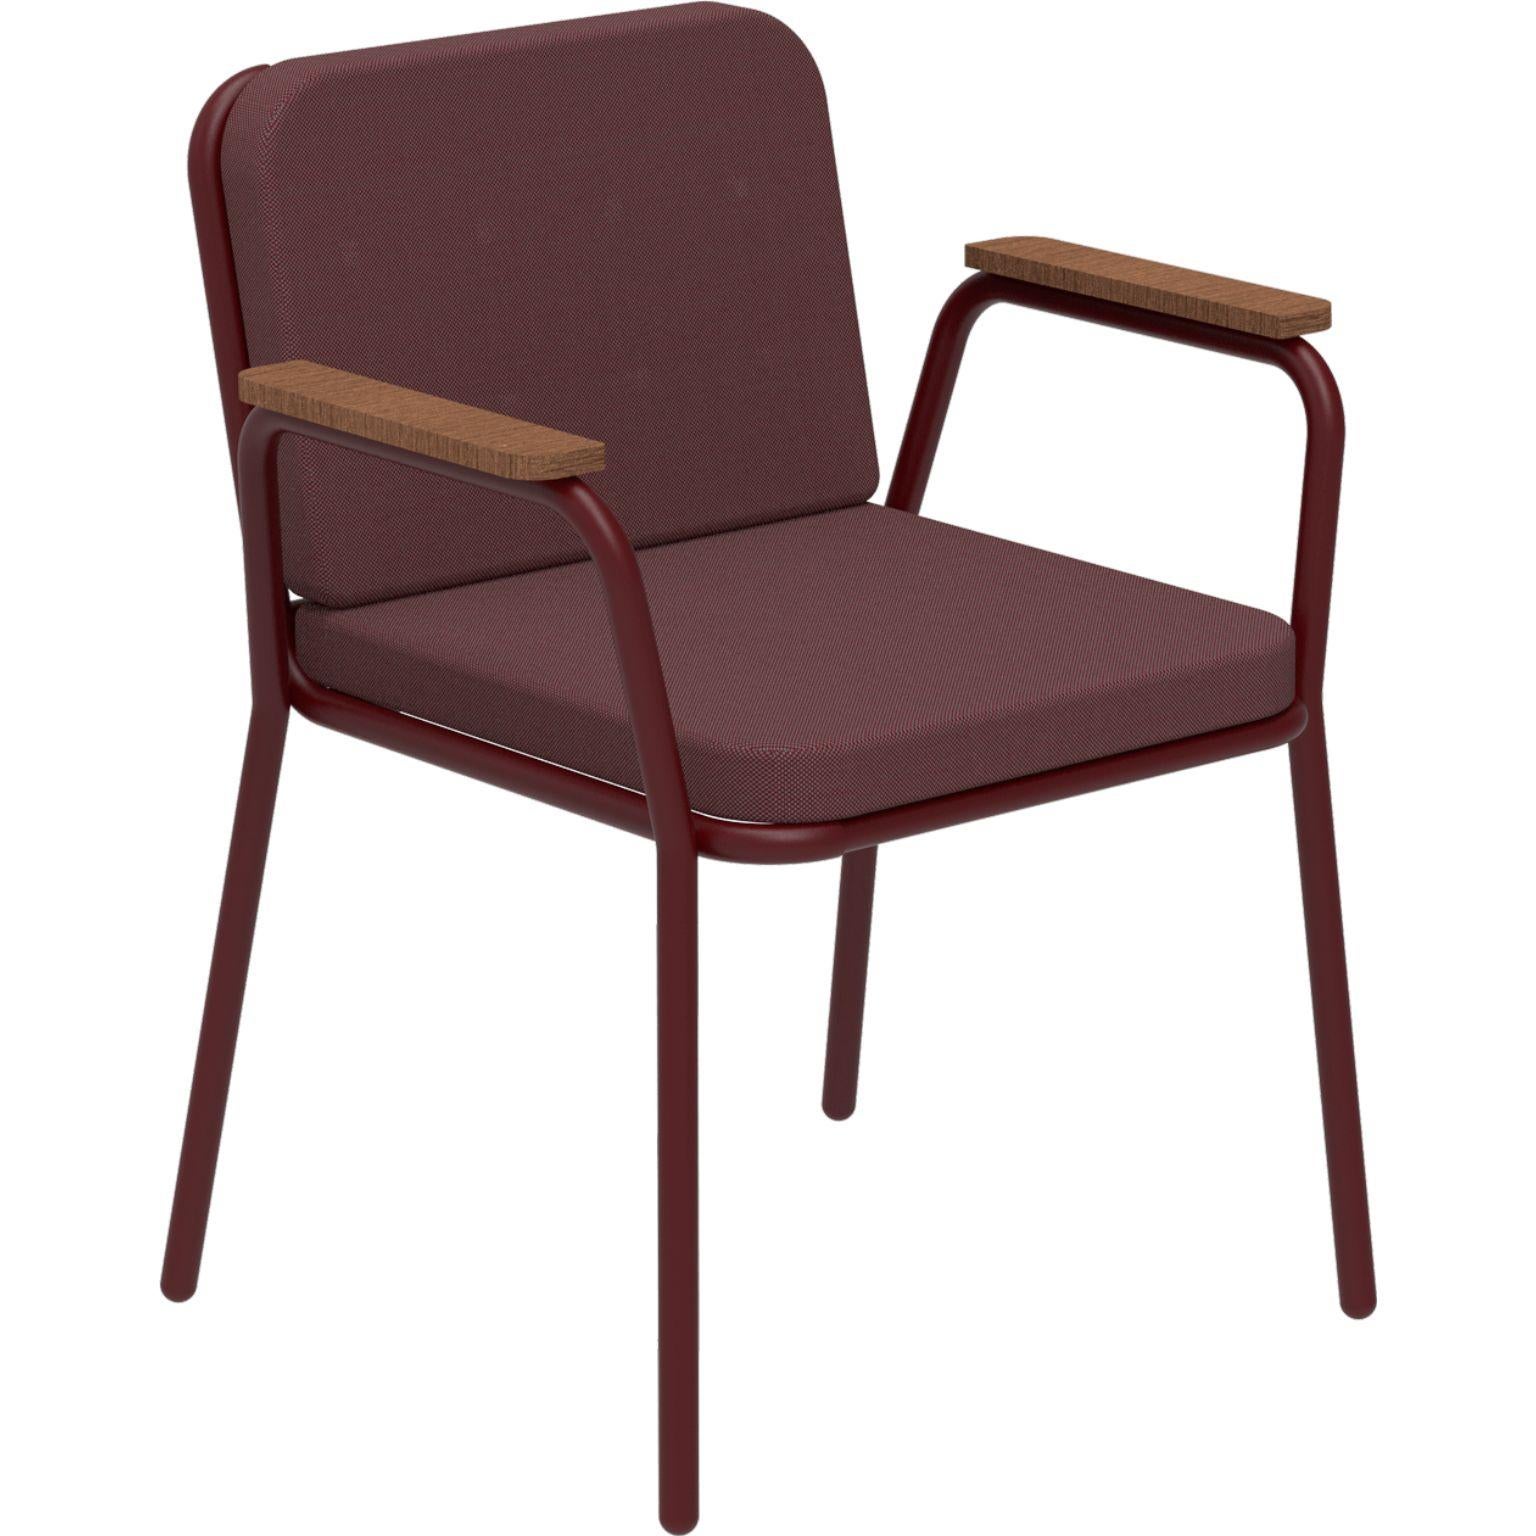 Nature Burgundy Armchair by MOWEE
Dimensions: D60 x W67 x H83 cm (seat height 42 cm).
Material: Aluminum, upholstery and Iroko Wood.
Weight: 5 kg.
Also available in different colors and finishes. Please contact us.

An unmistakable collection